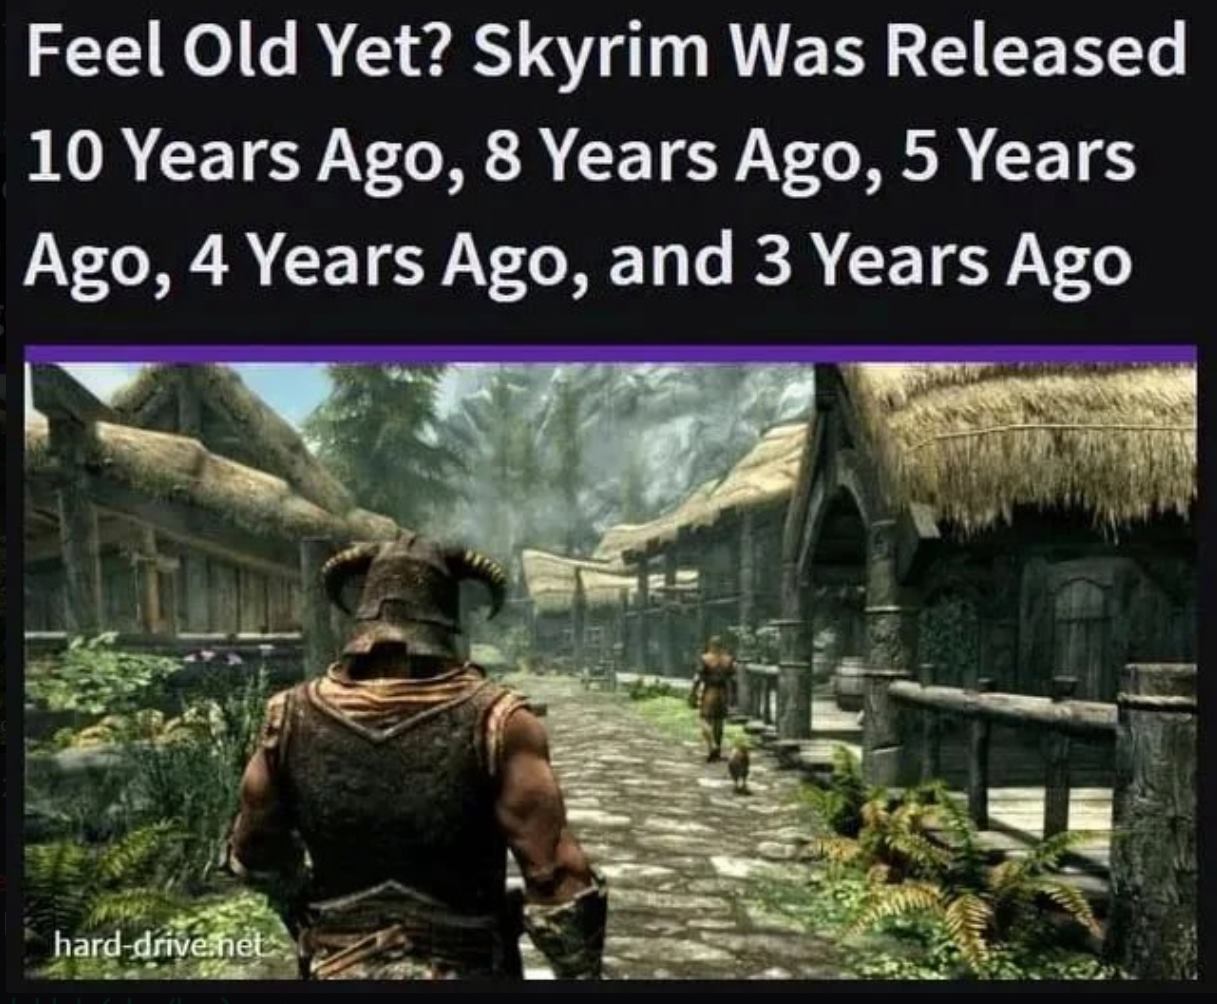 funny gaming memes - best oculus rift games - Feel Old Yet? Skyrim Was Released 10 Years Ago, 8 Years Ago, 5 Years Ago, 4 Years Ago, and 3 Years Ago harddrive.net